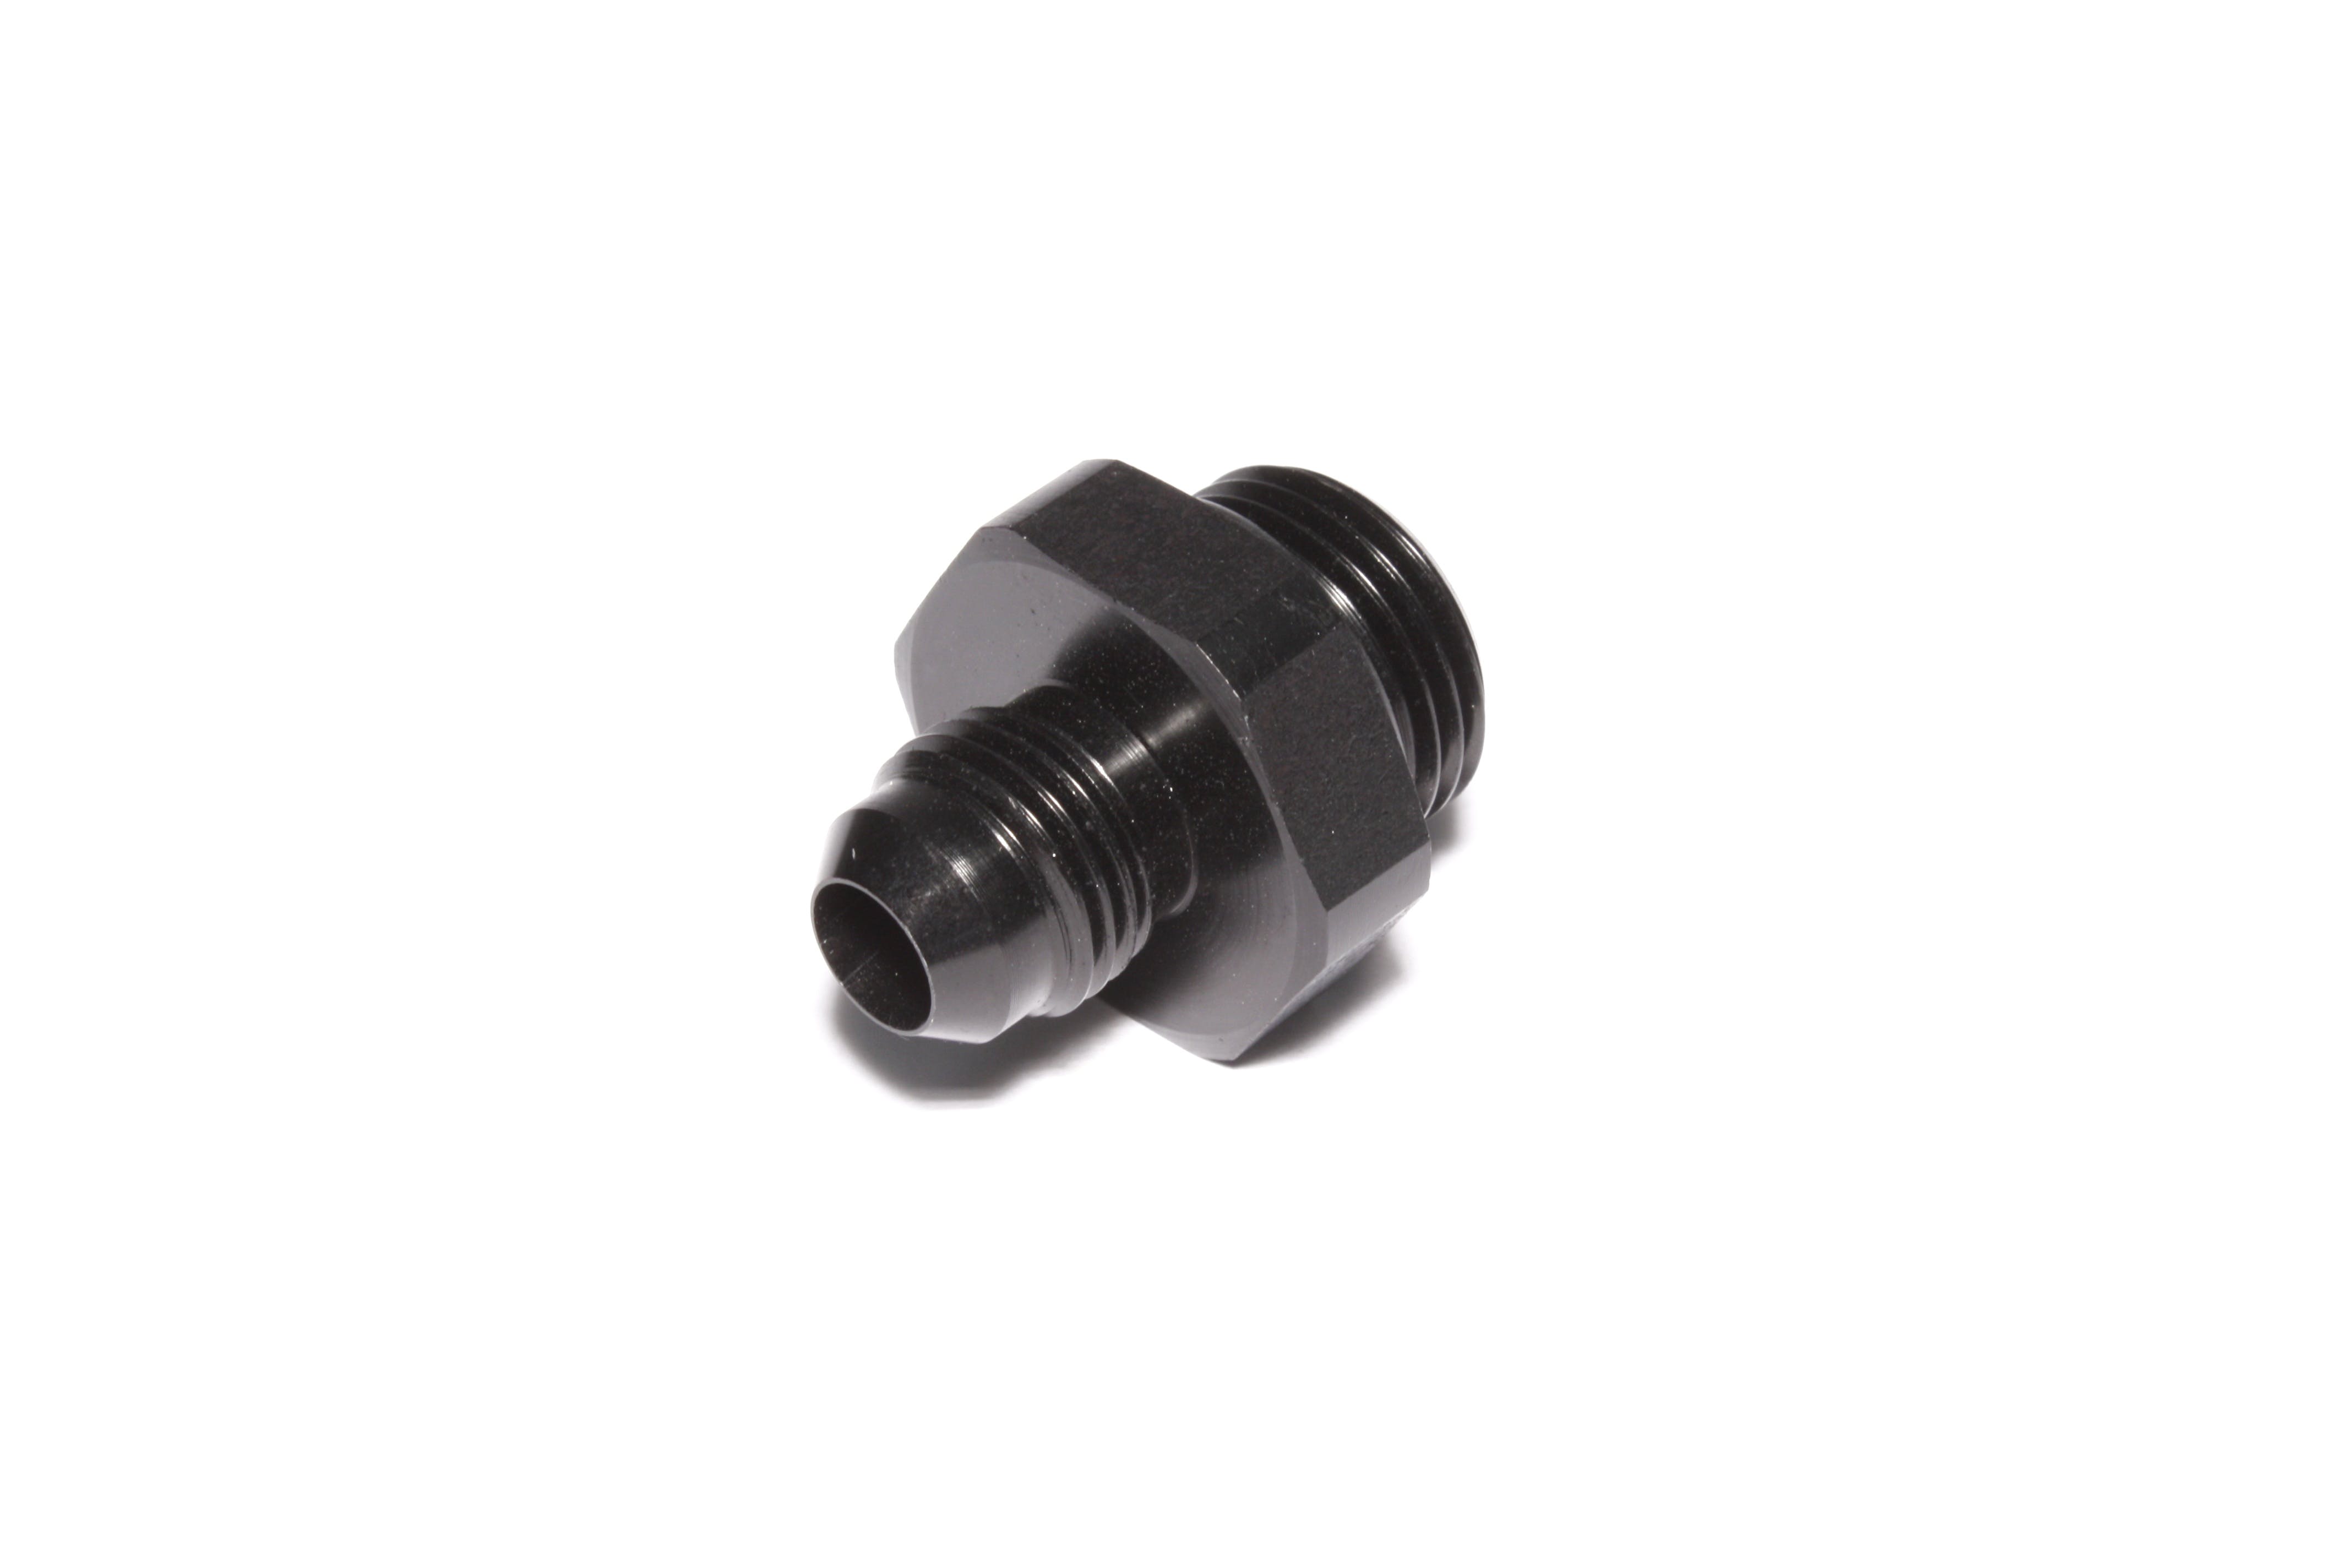 FAST - Fuel Air Spark Technology 30281-1 8 SAE O-Ring Male to 6 AN Male